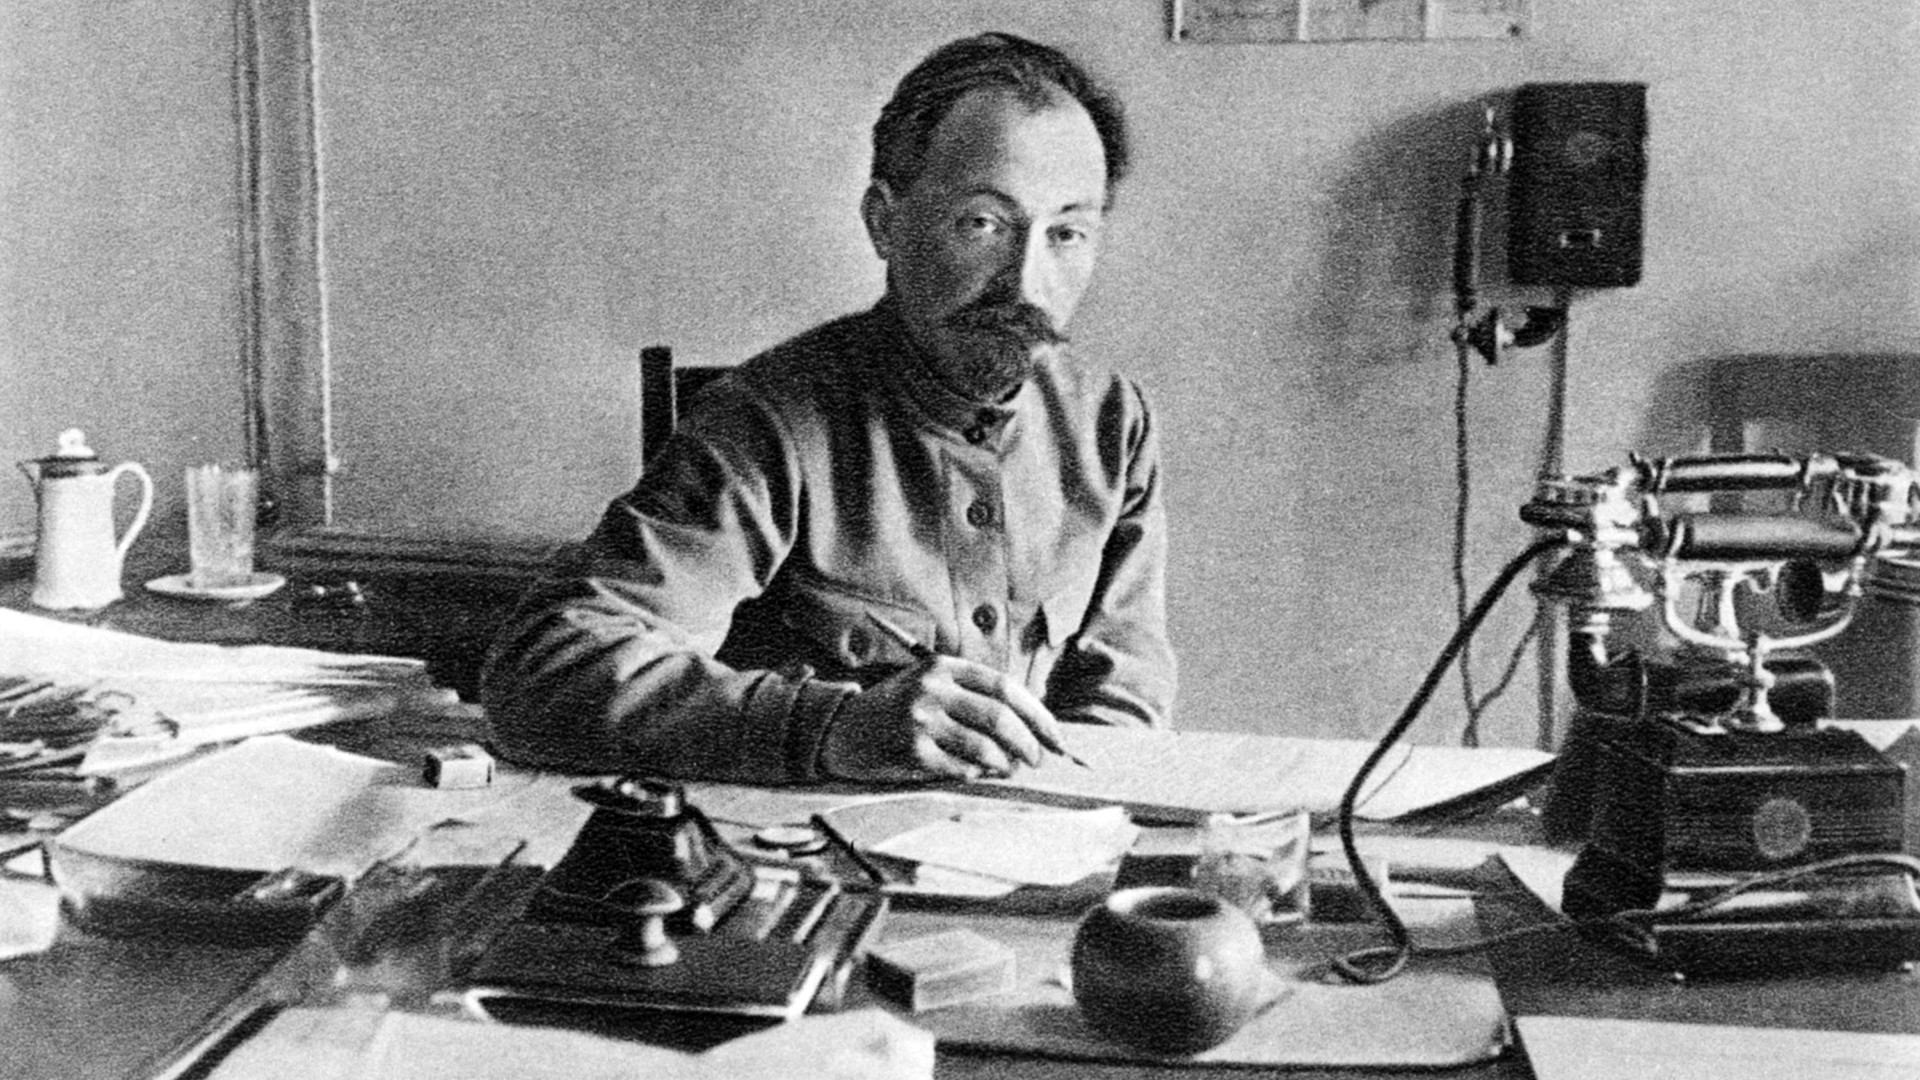 'Iron Felix' behind his working table. Maybe he is signing execution orders - or, perhaps, establishing another orphanage. 